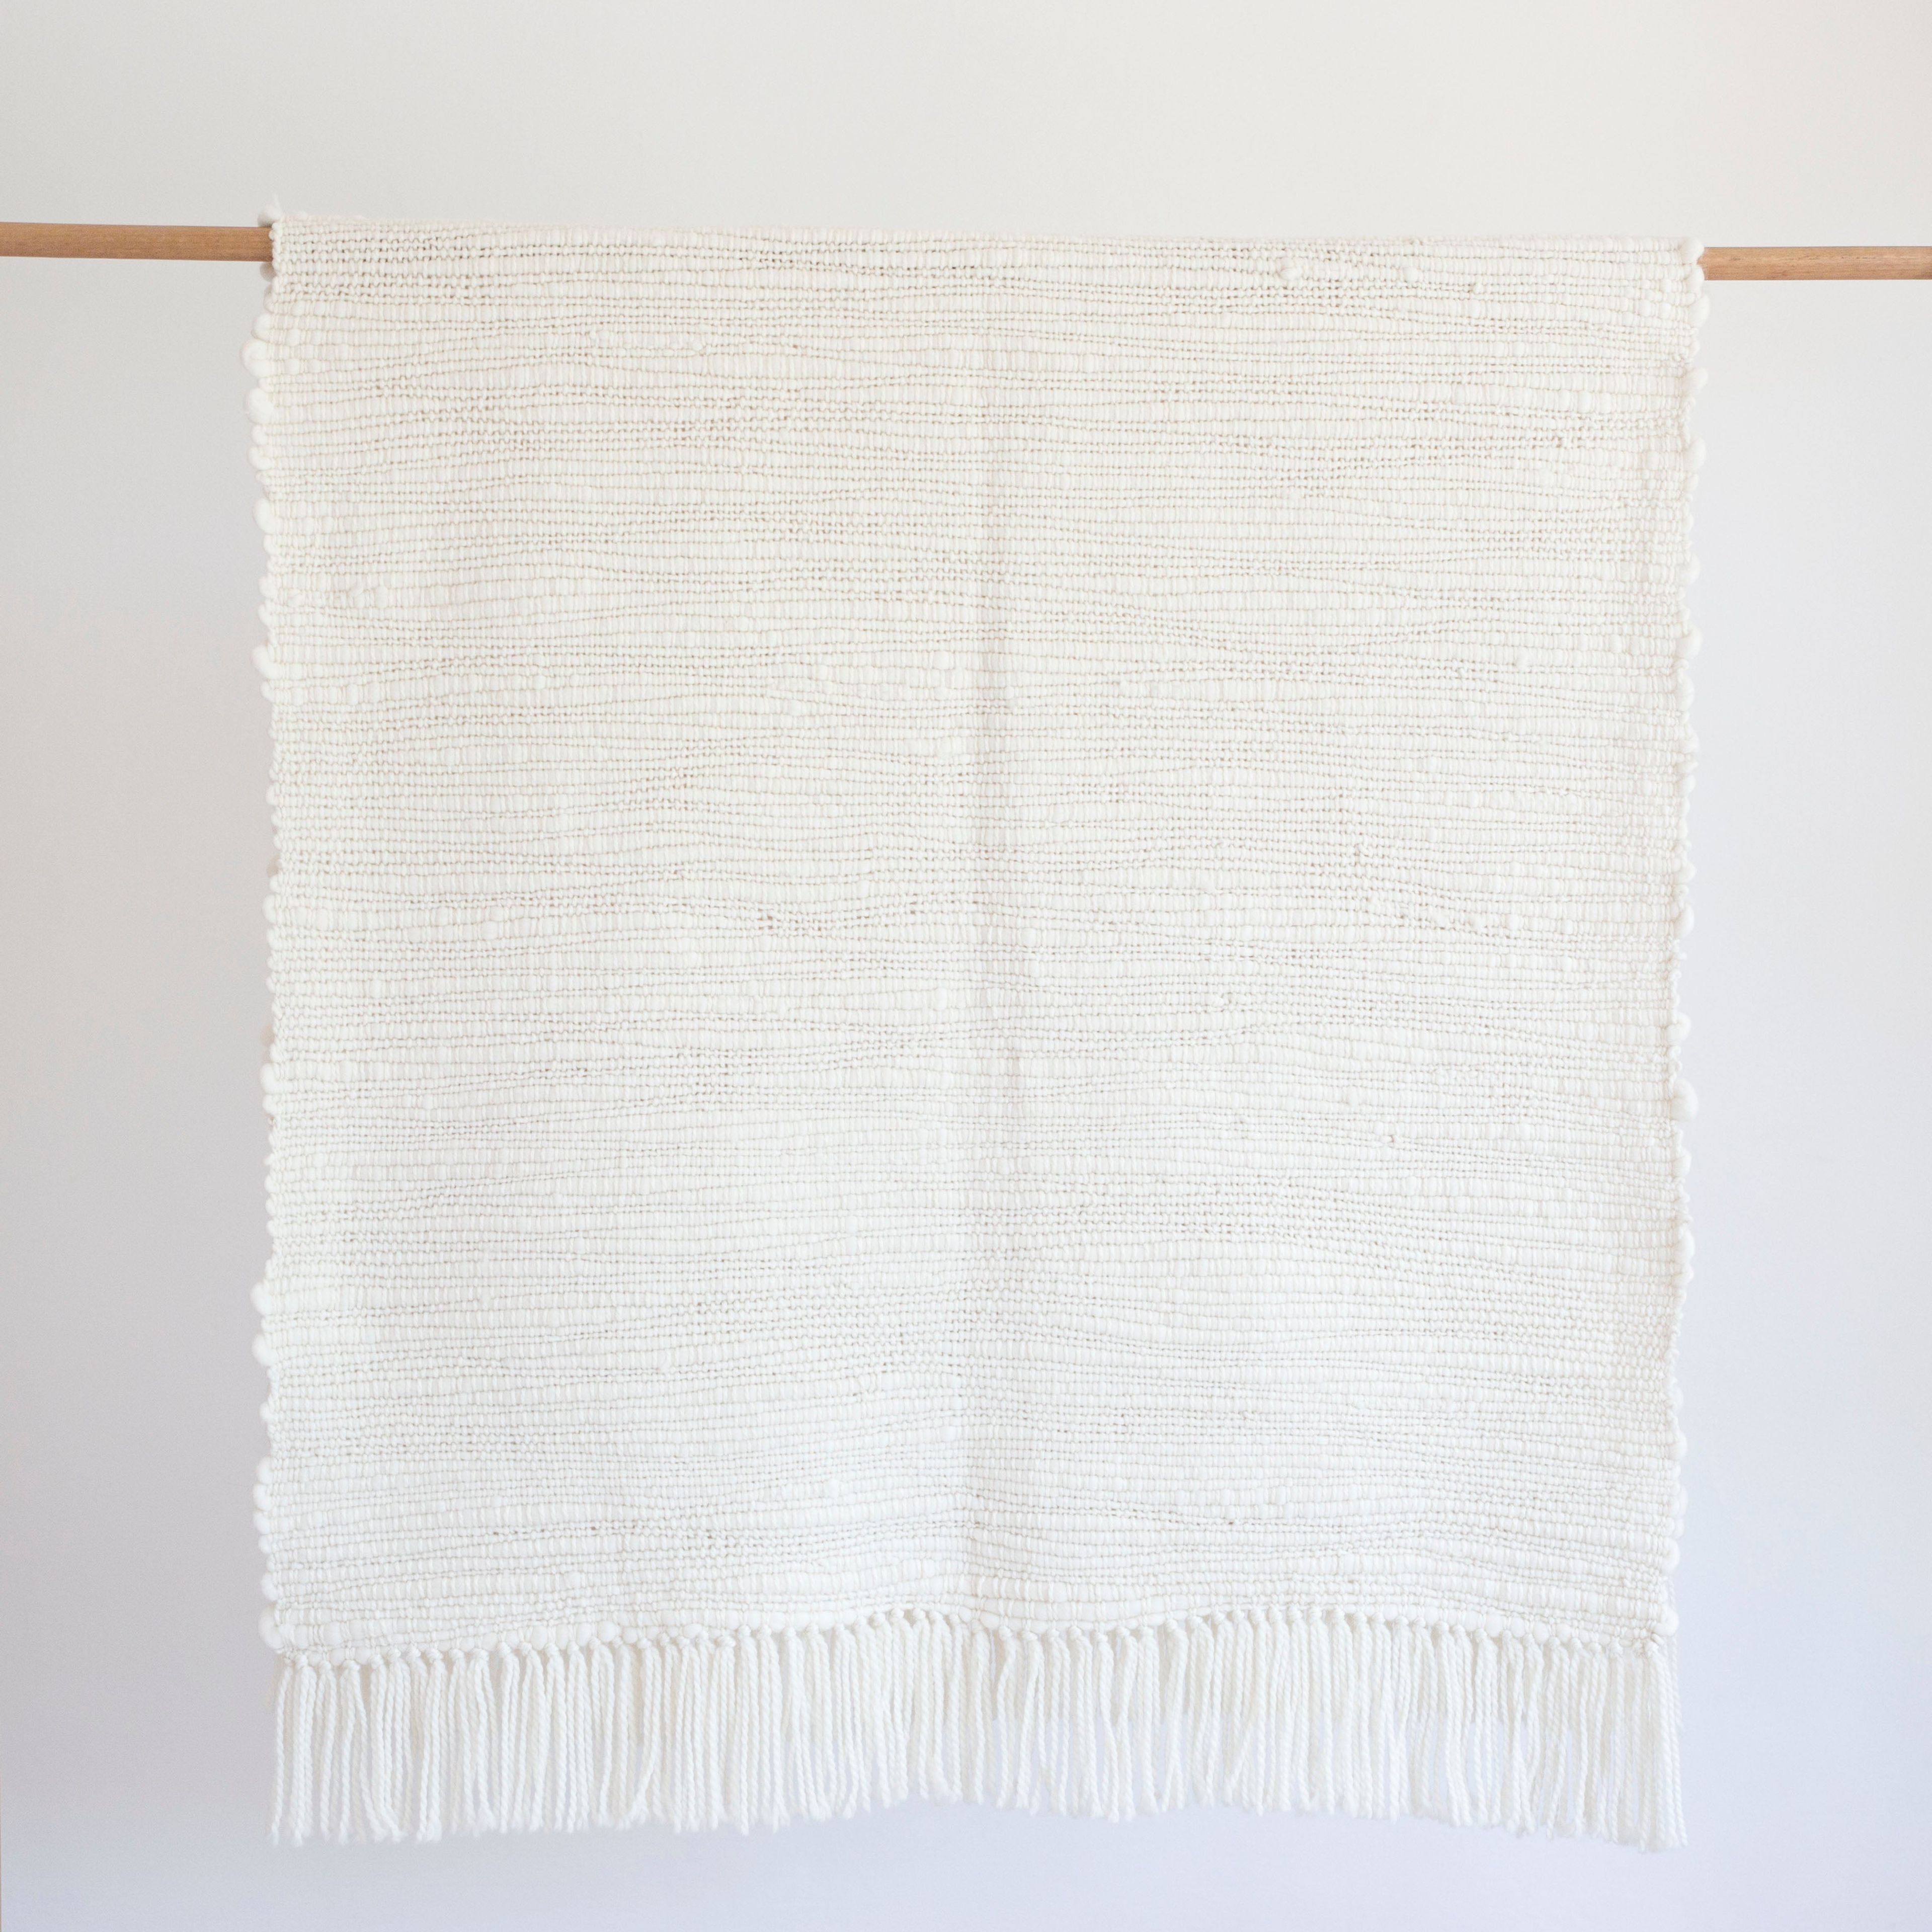 Aroma Throw Blanket - Handwoven Chunky Merino Wool with Fringes - Luxurious, Eco-Friendly and Perfect to Elevate Your Home Decor